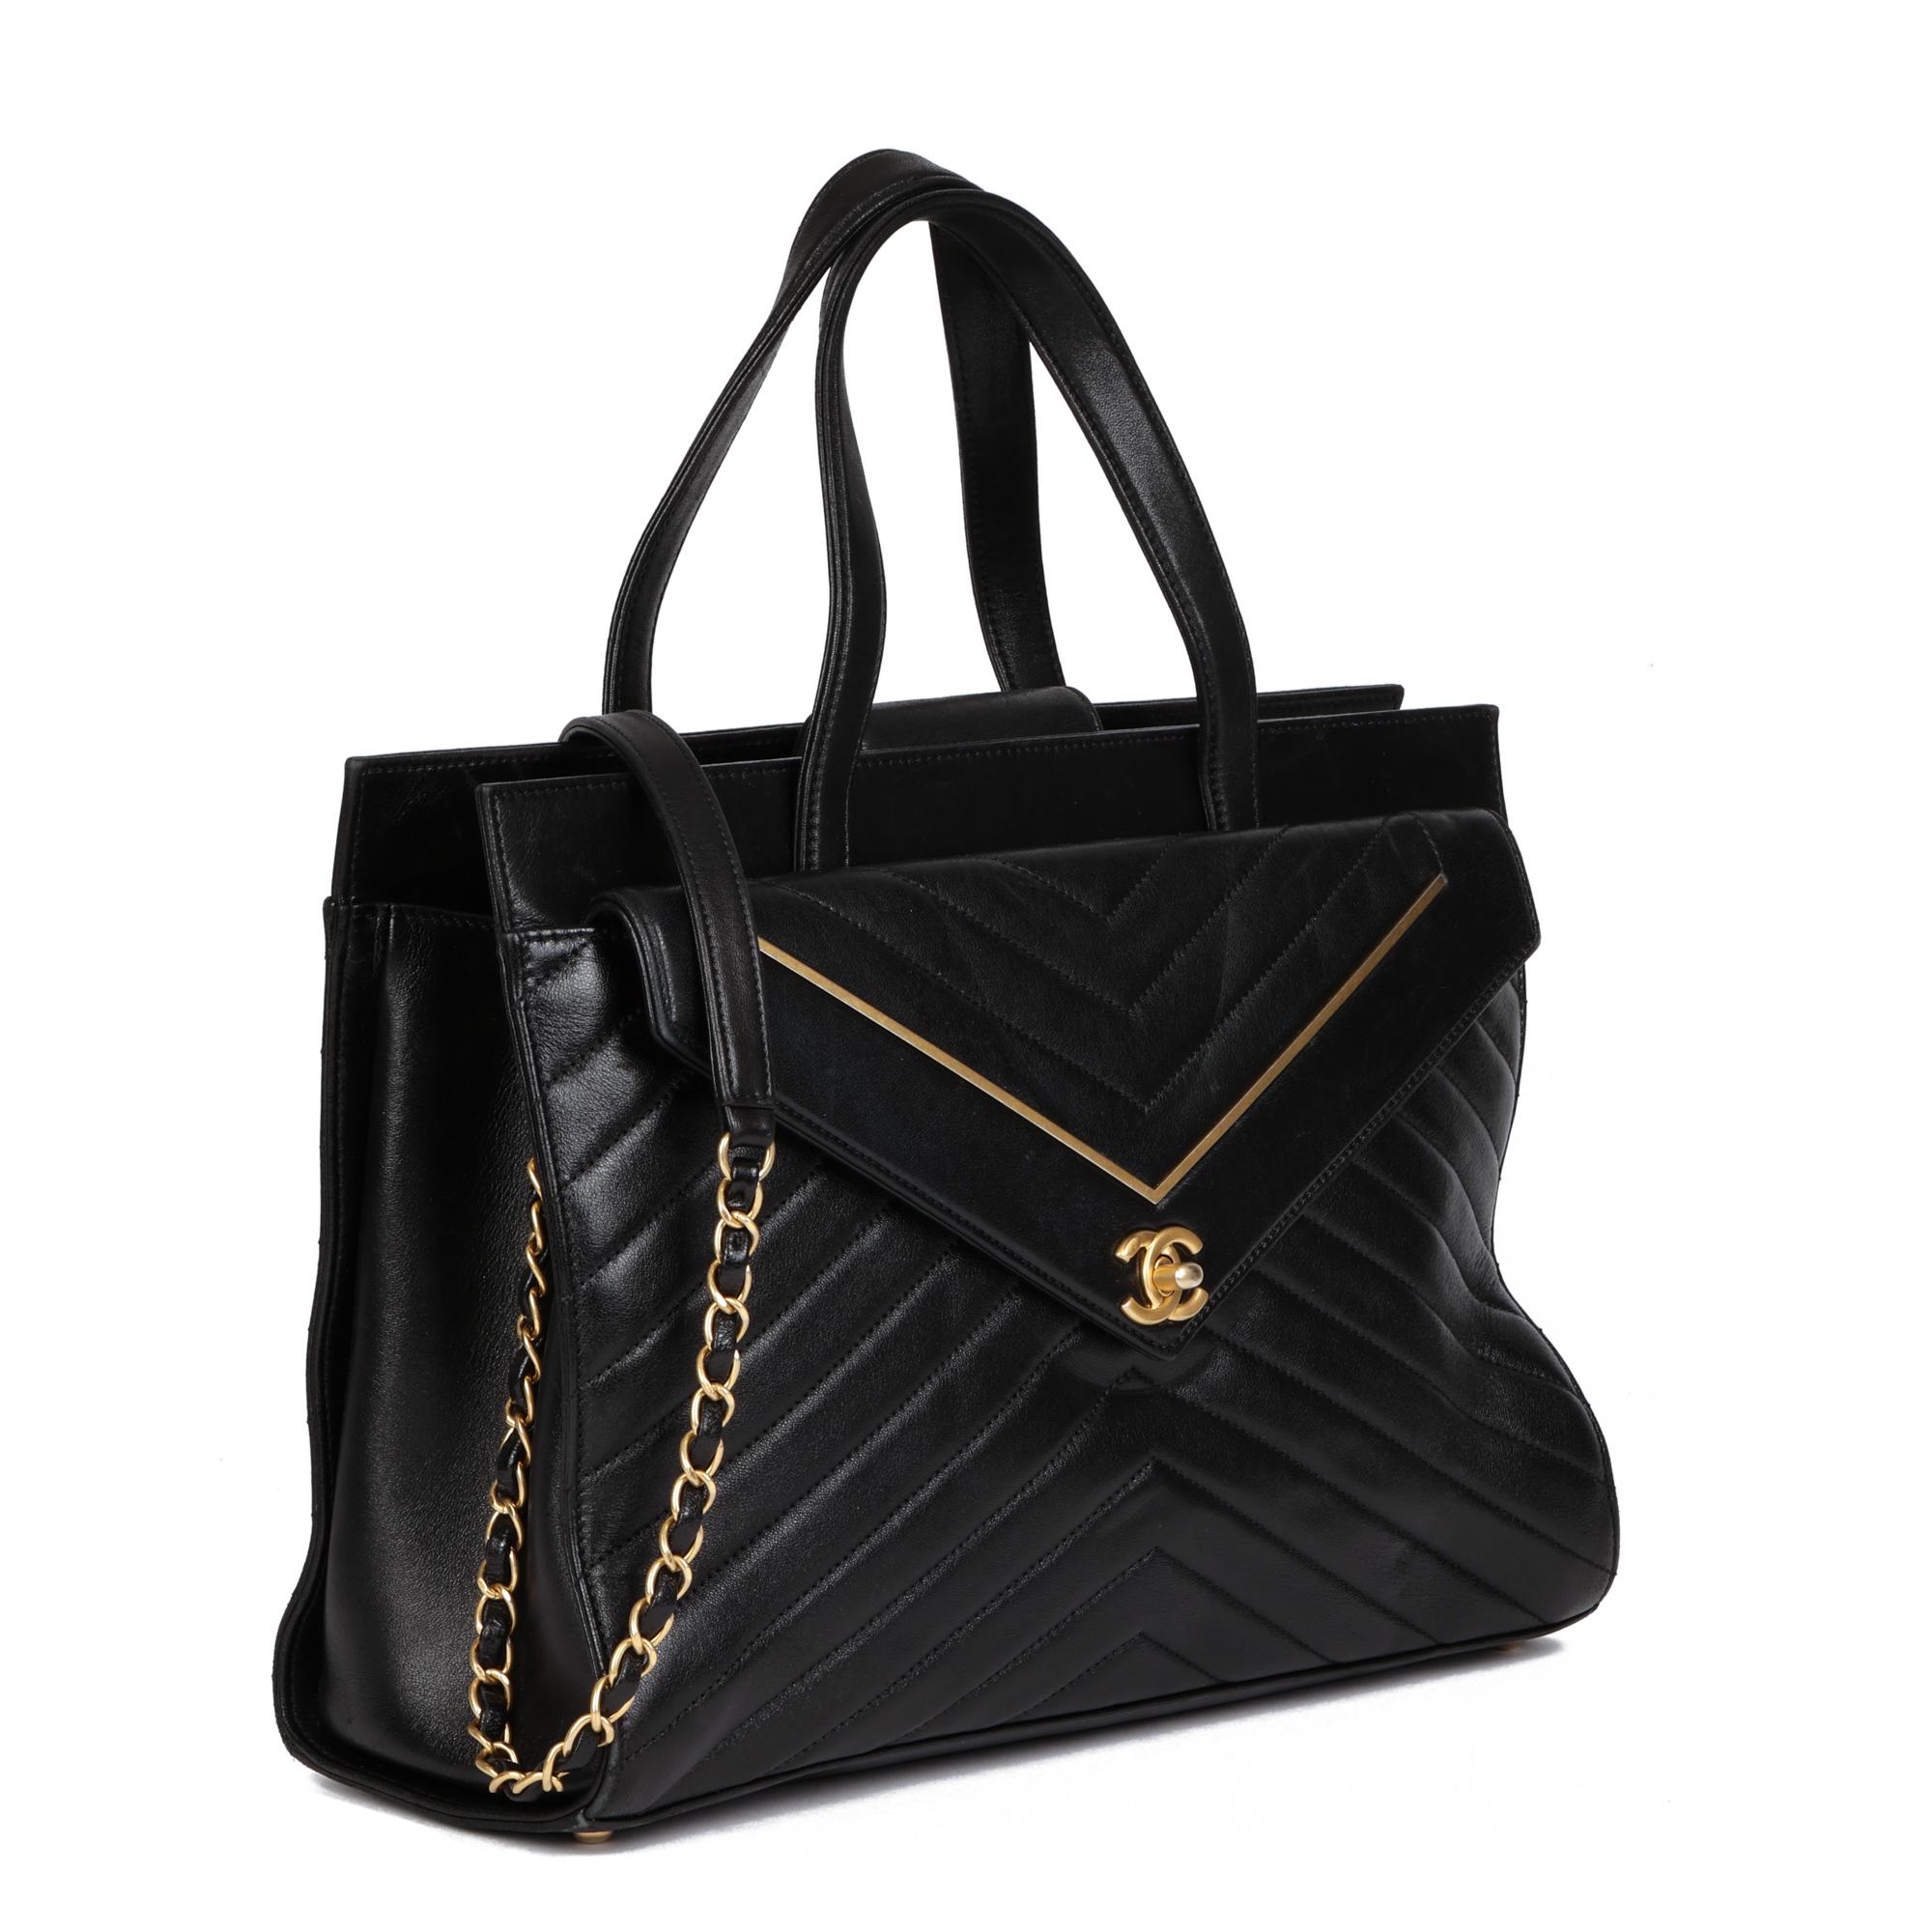 CHANEL
Black Chevron Quilted Lambskin Classic Shoulder Tote

Xupes Reference: CB672
Serial Number: 24737143
Age (Circa): 2017
Accompanied By: Chanel Shoulder Strap
Authenticity Details: Serial Sticker (Made in Italy)
Gender: Ladies
Type: Tote,